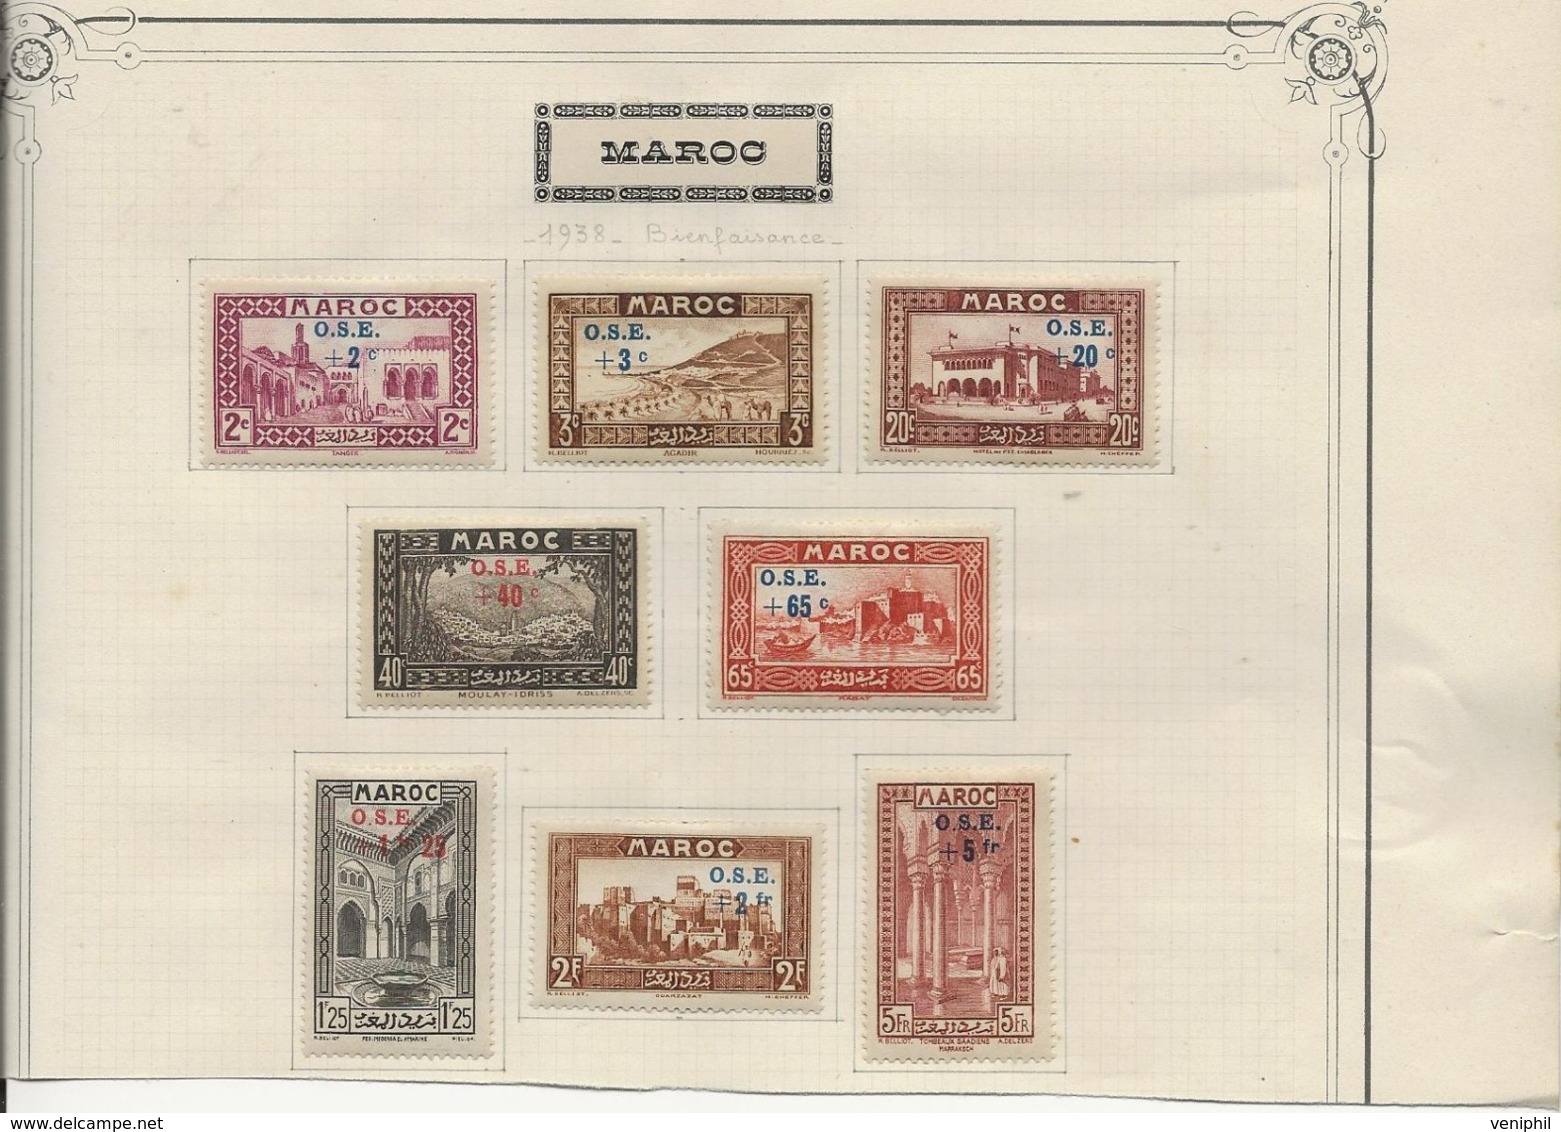 MAROC - SERIE N° 153 A 160 - NEUF X SURCHARGEE O.S.E. ANNEE 1938  -COTE :44 € - Unused Stamps